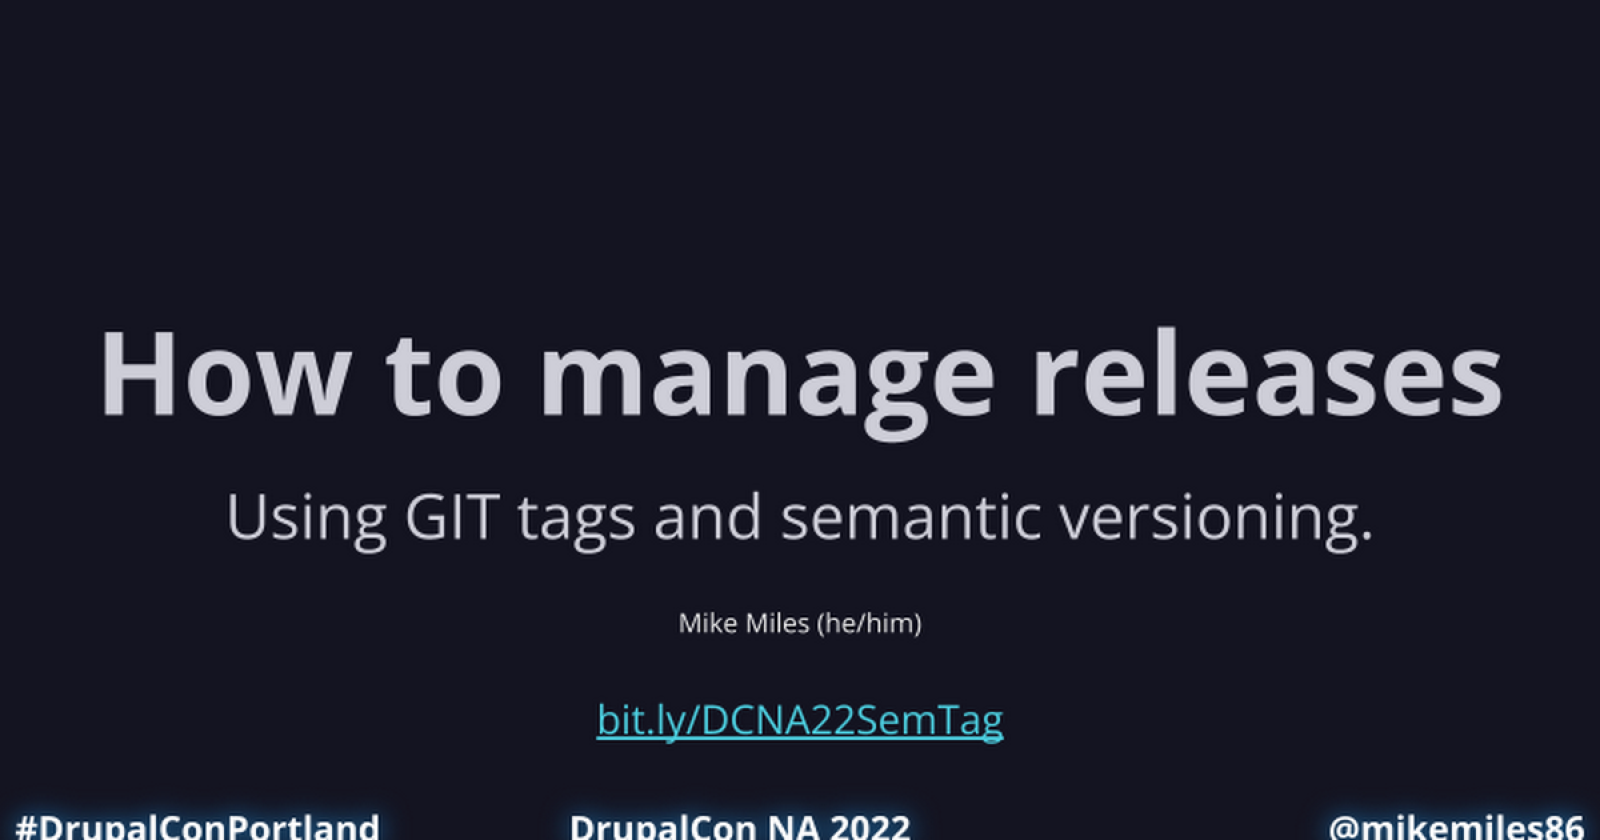 Managing releases using Git tags and semantic versioning